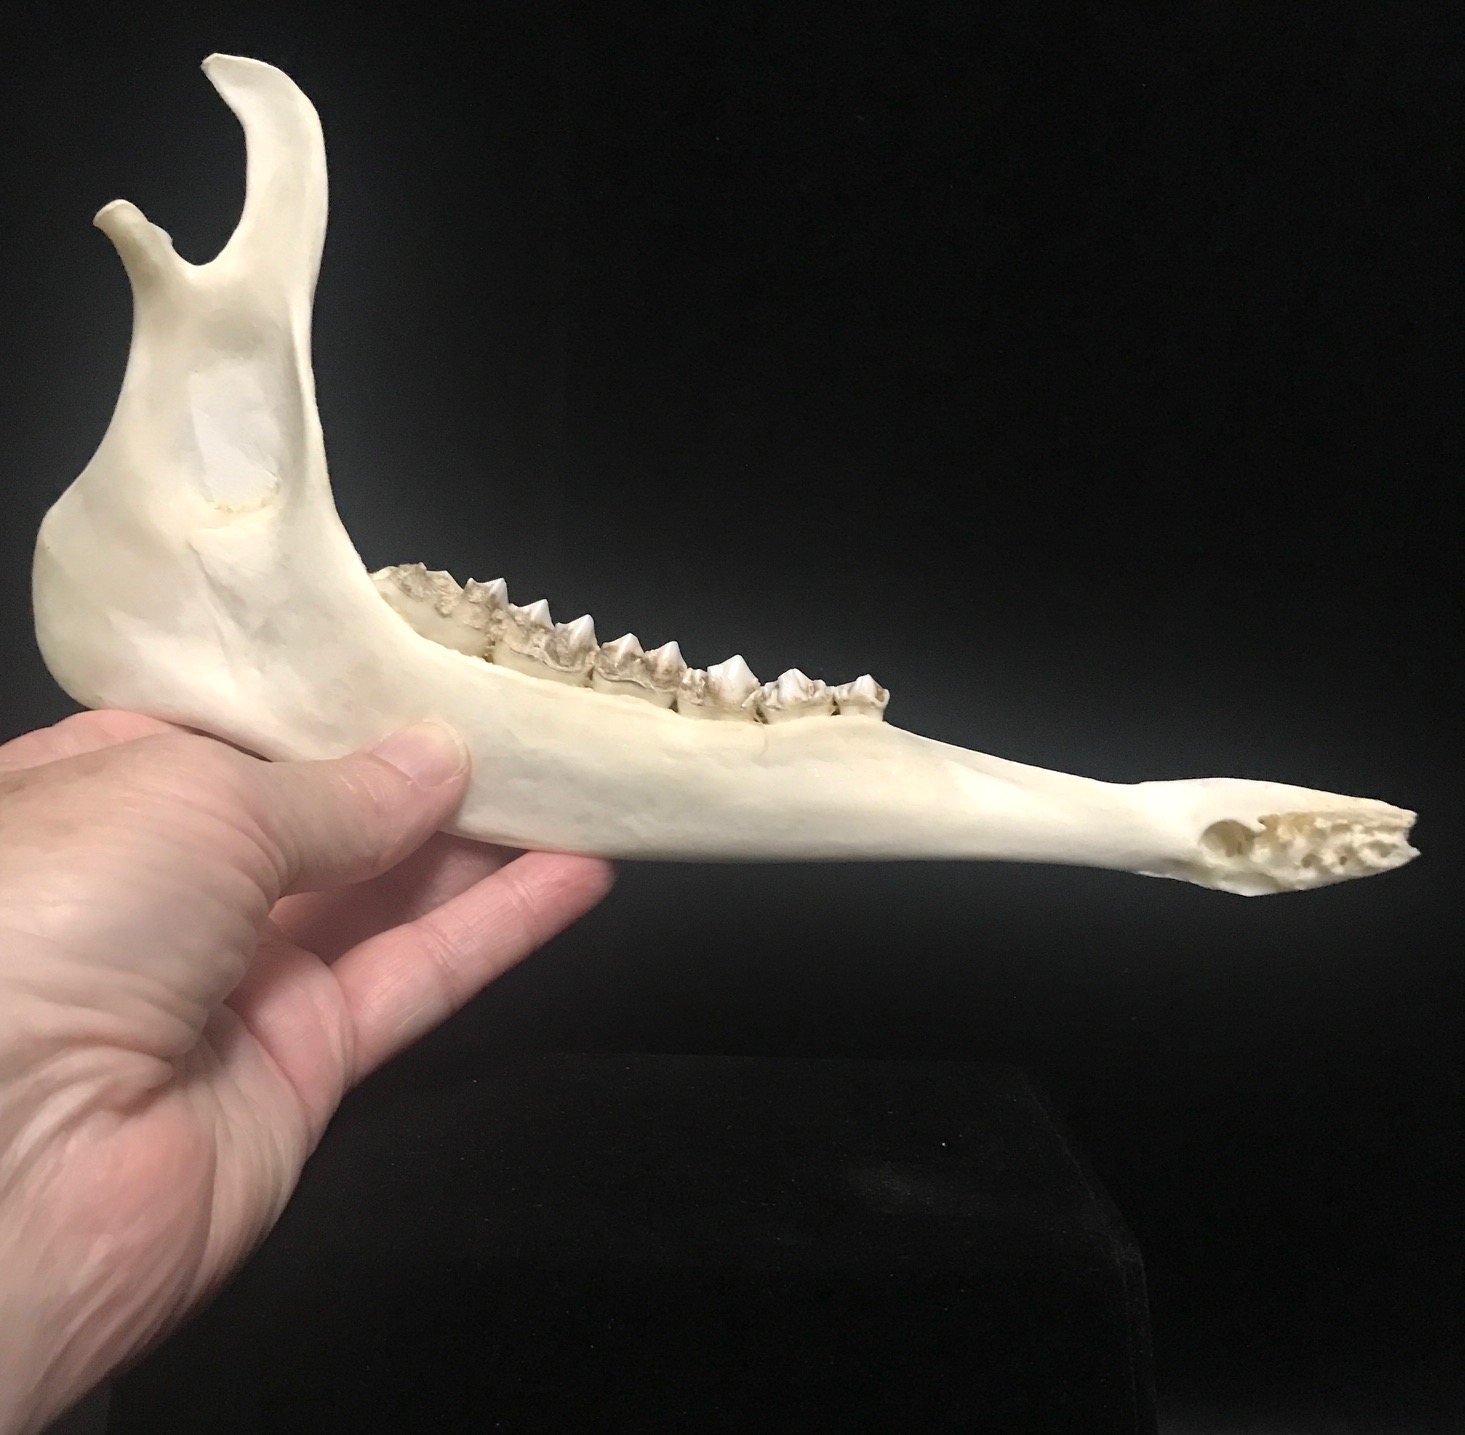 Genuine deer jawbones, available for purchase at natur